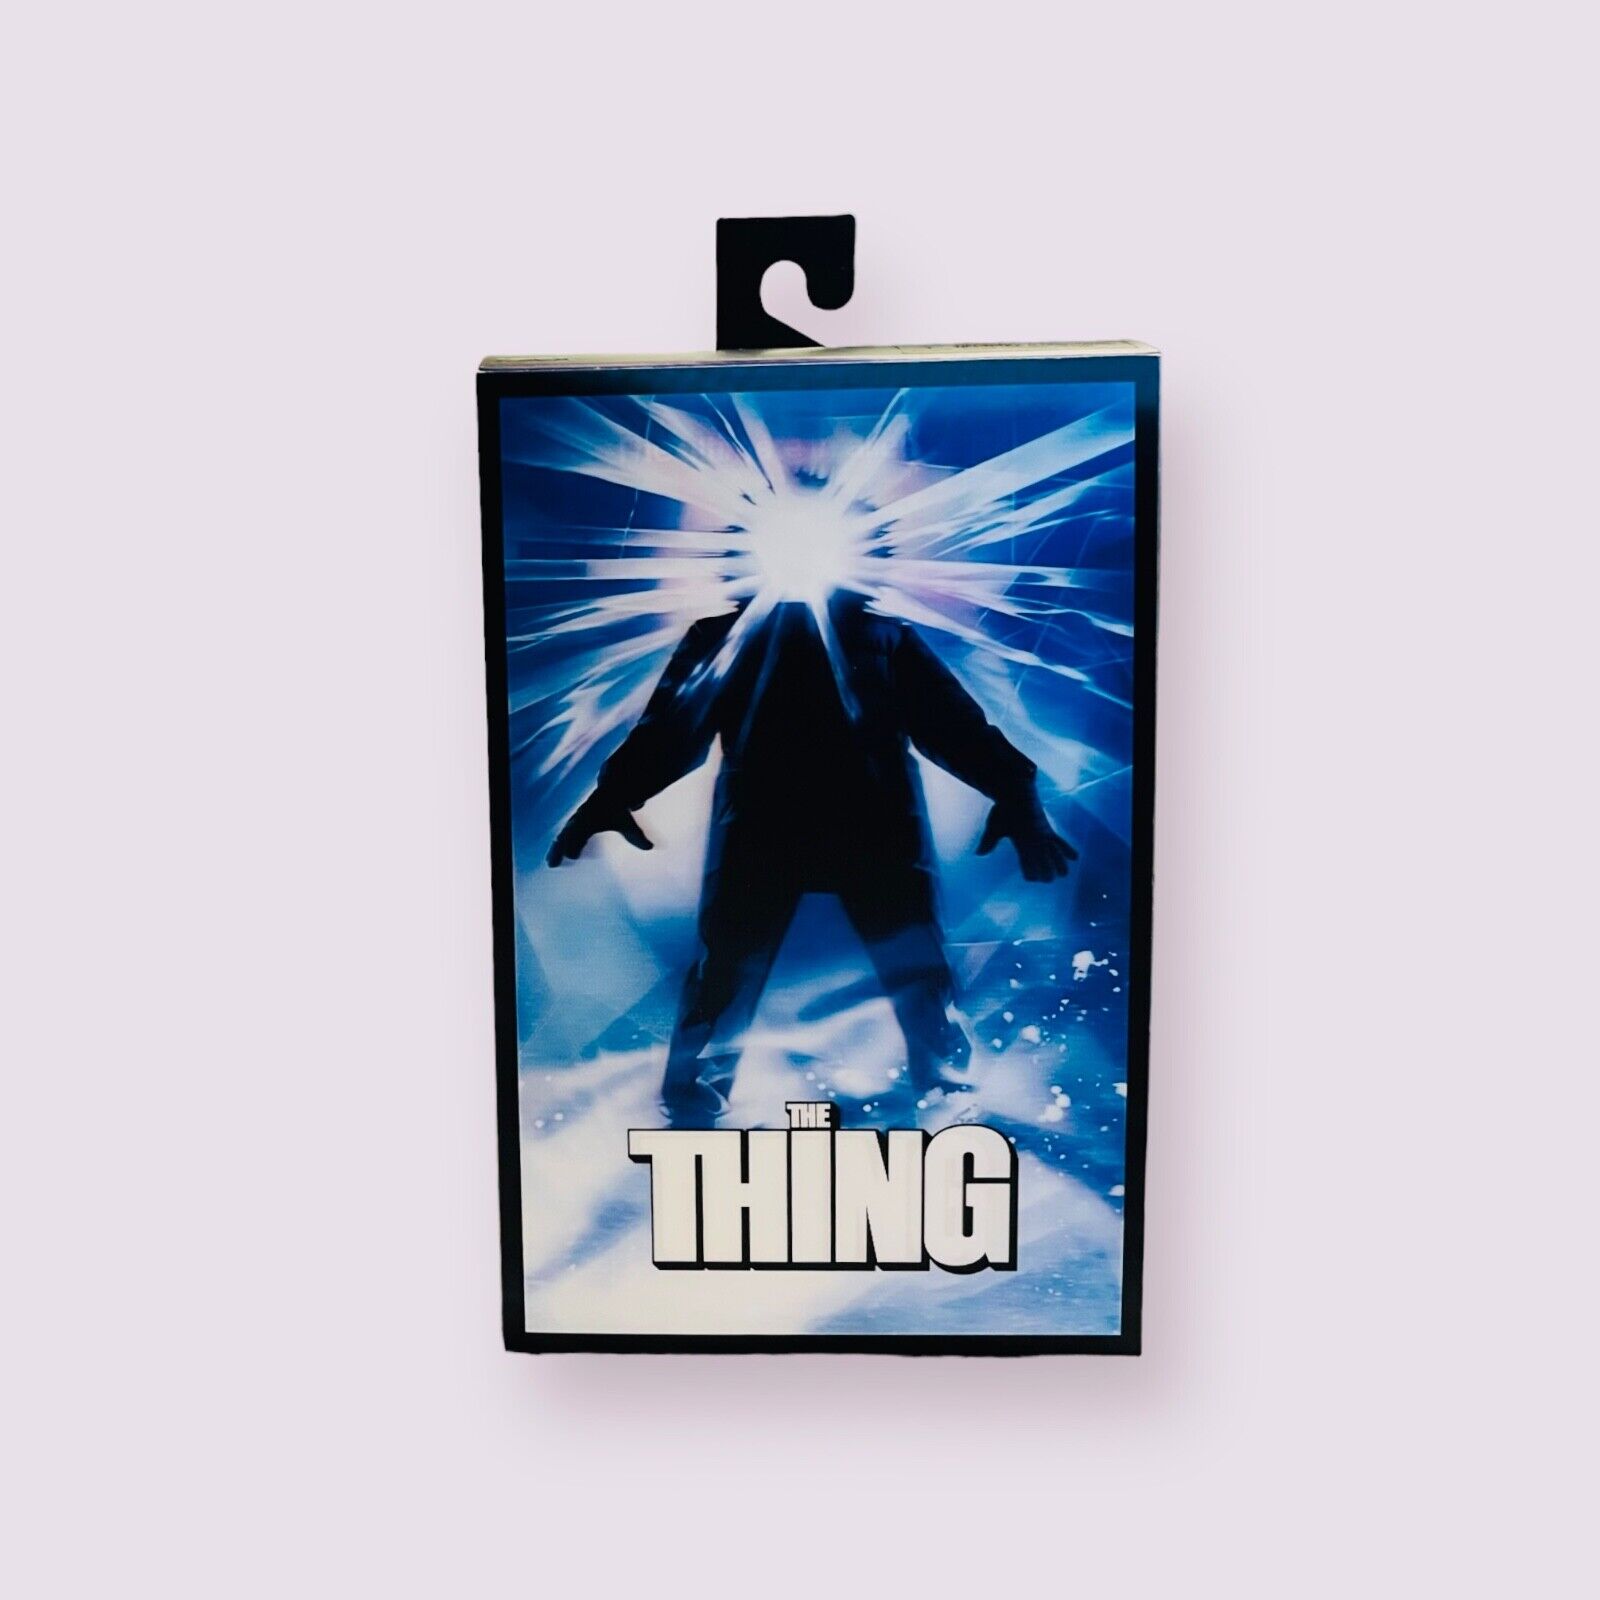 NECA - The Thing - 40th Anniversary Poster Figure - SDCC EXCLUSIVE